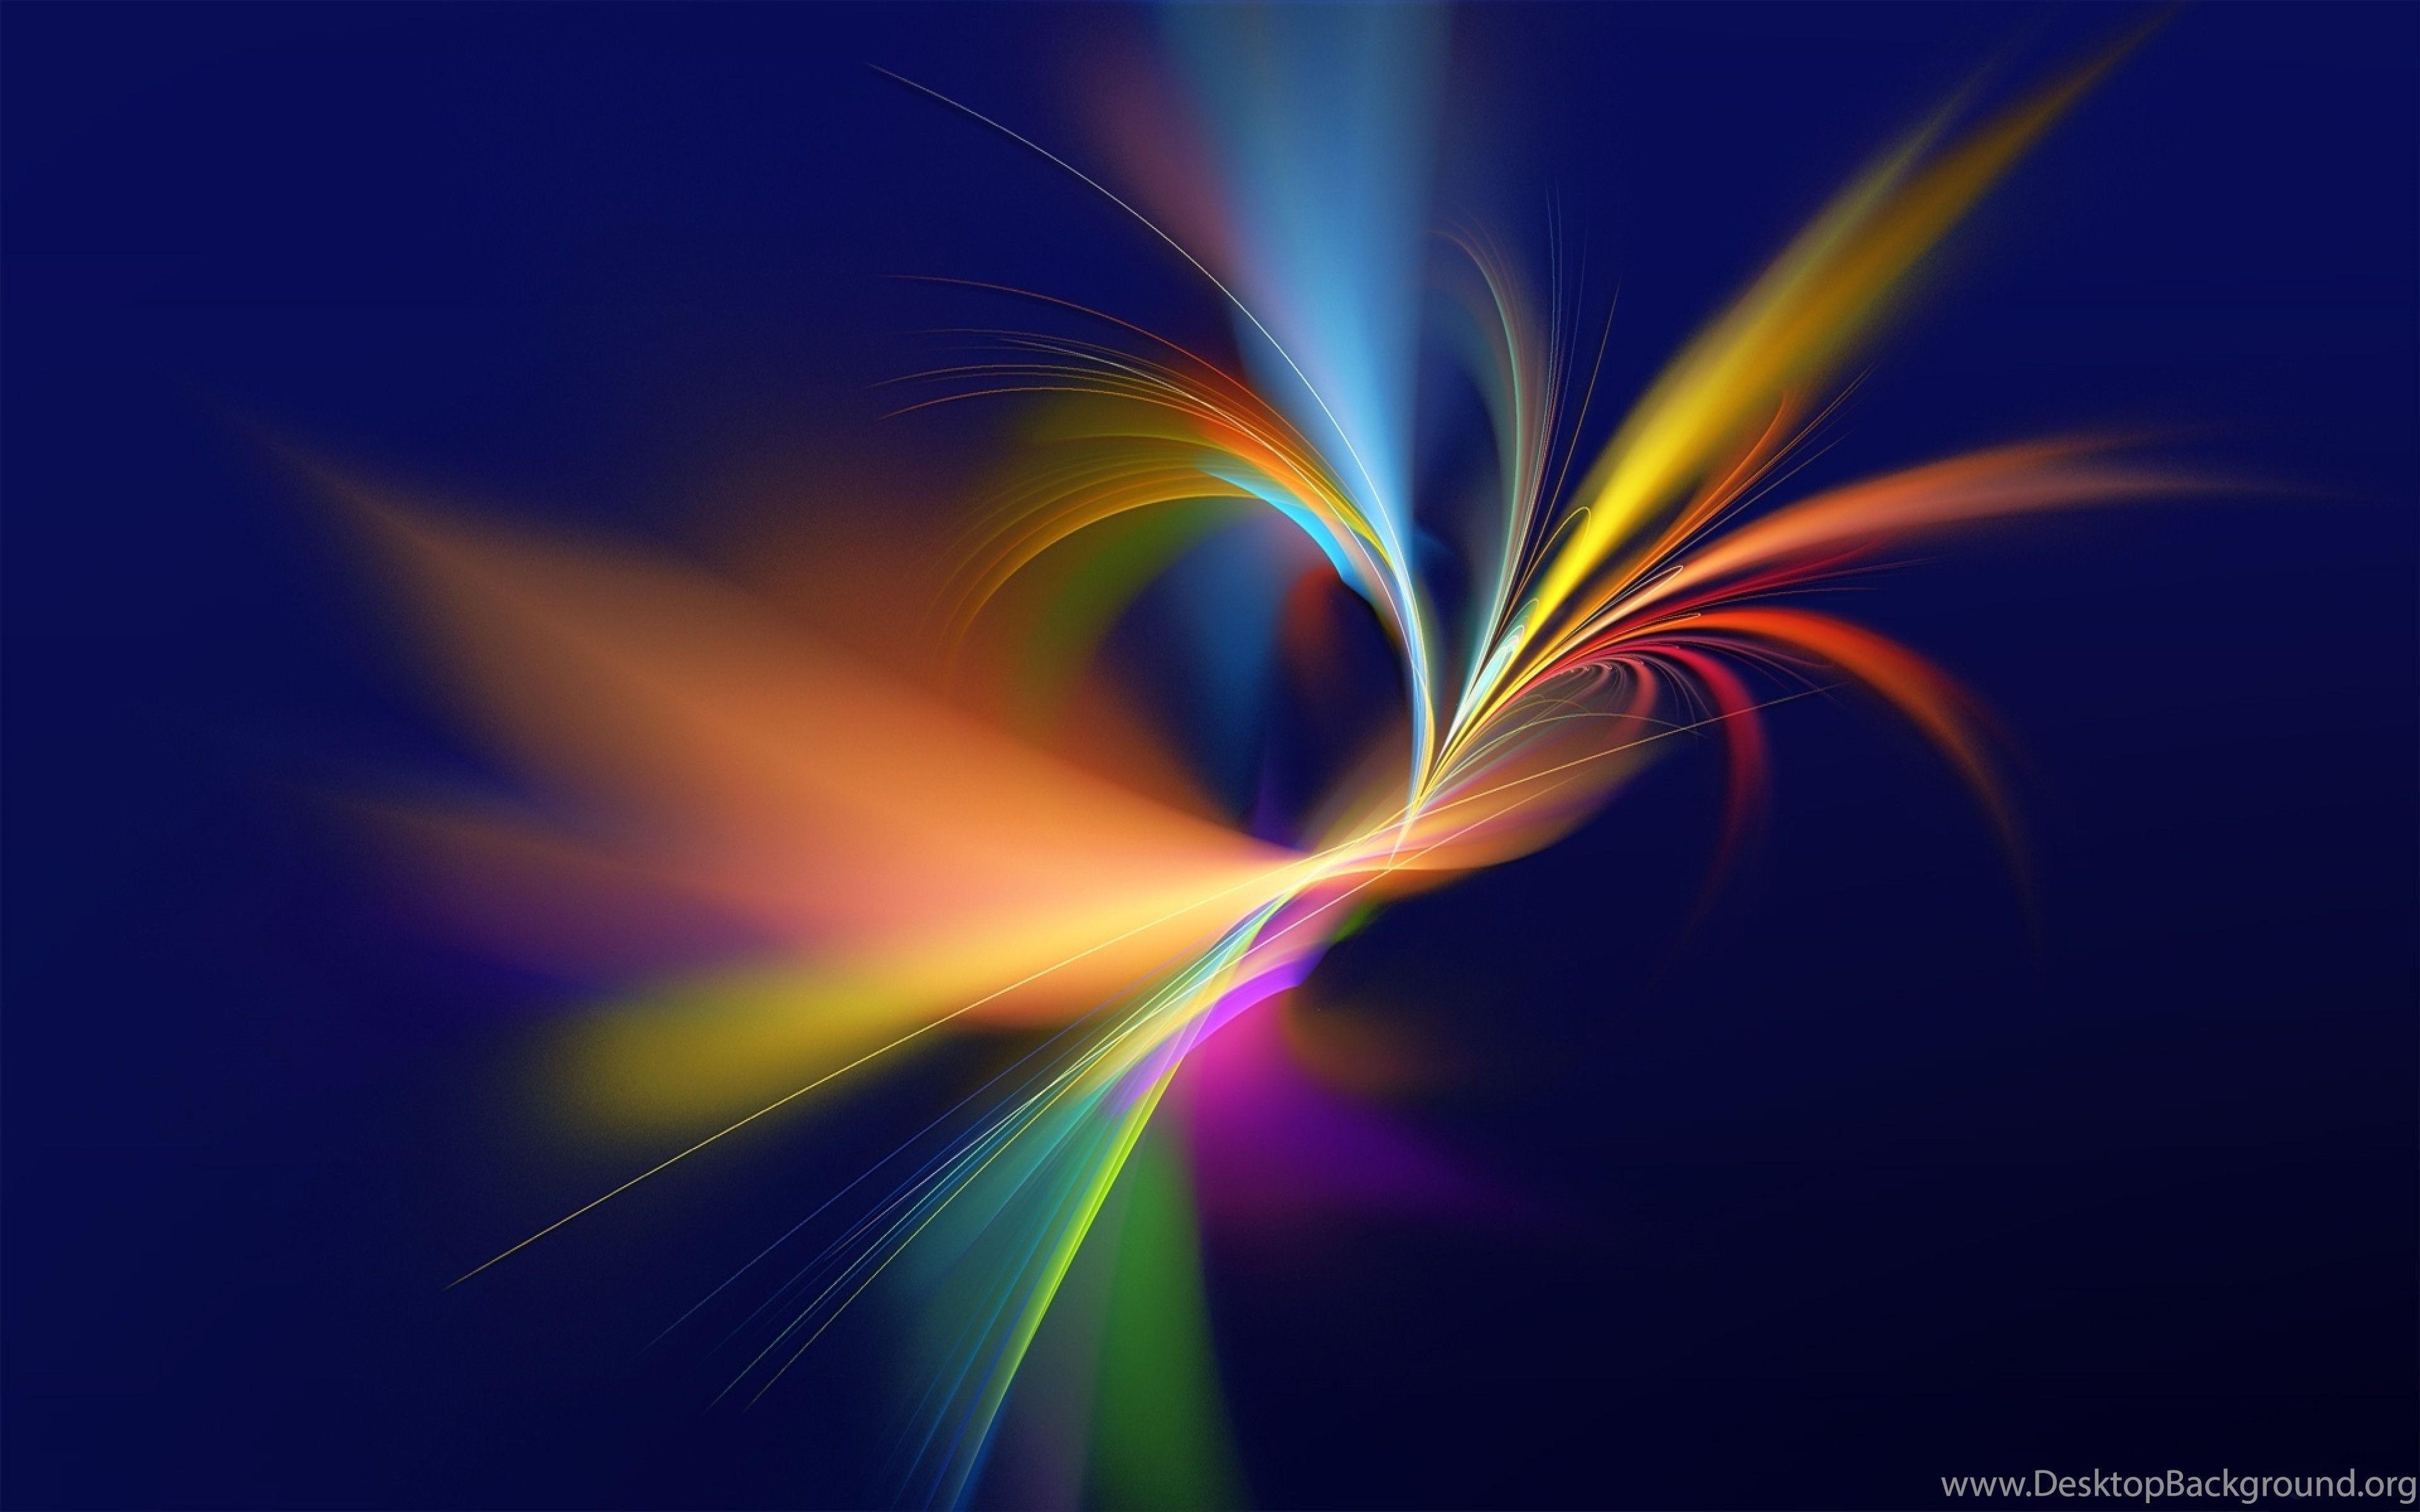 Download Wallpaper 3840x2400 Abstract, Paint, Colorful, Smoke. Desktop Background